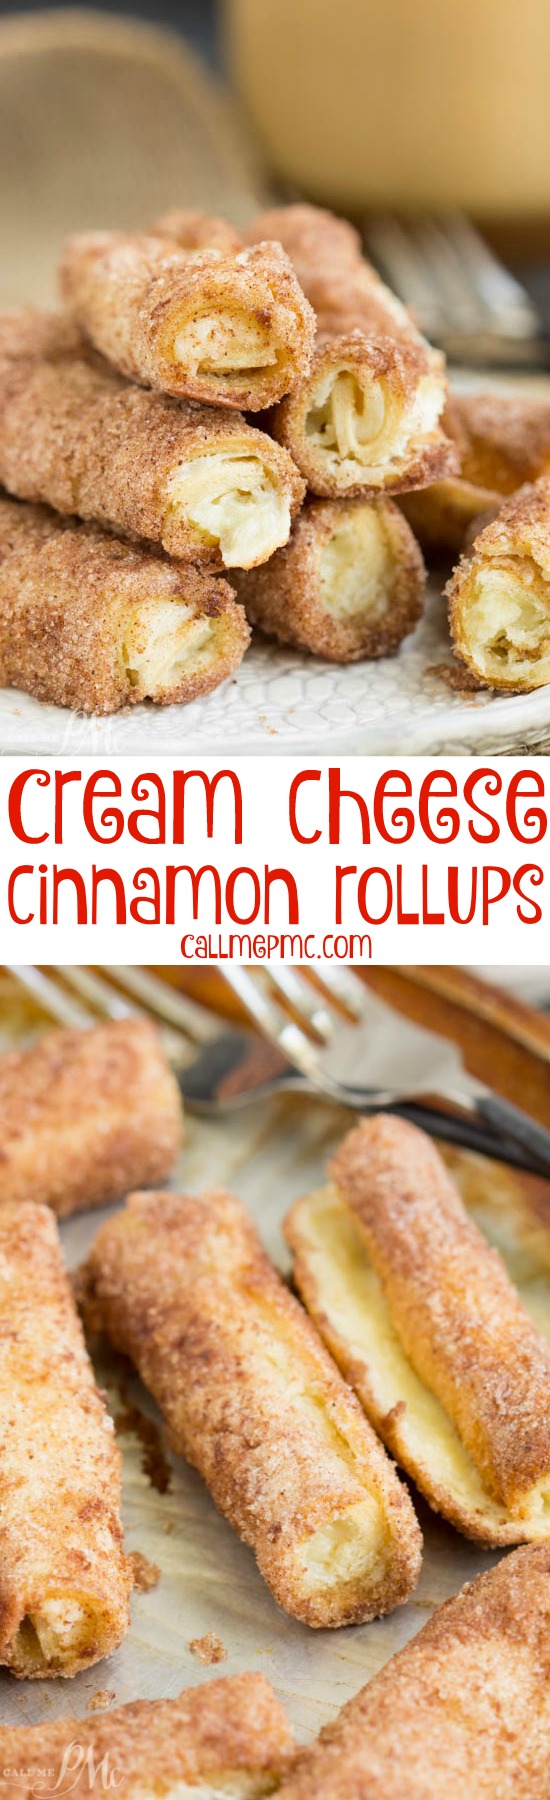 Cheese Blitz is a tasty make-ahead breakfast or brunch recipe. They tastes much like cinnamon rolls without the wait time of having the yeast dough rise. Cream Cheese Cinnamon Rollups is a sweet creamy filling rolled between layers of crust with a light dusting of a cinnamon-sugar coating.